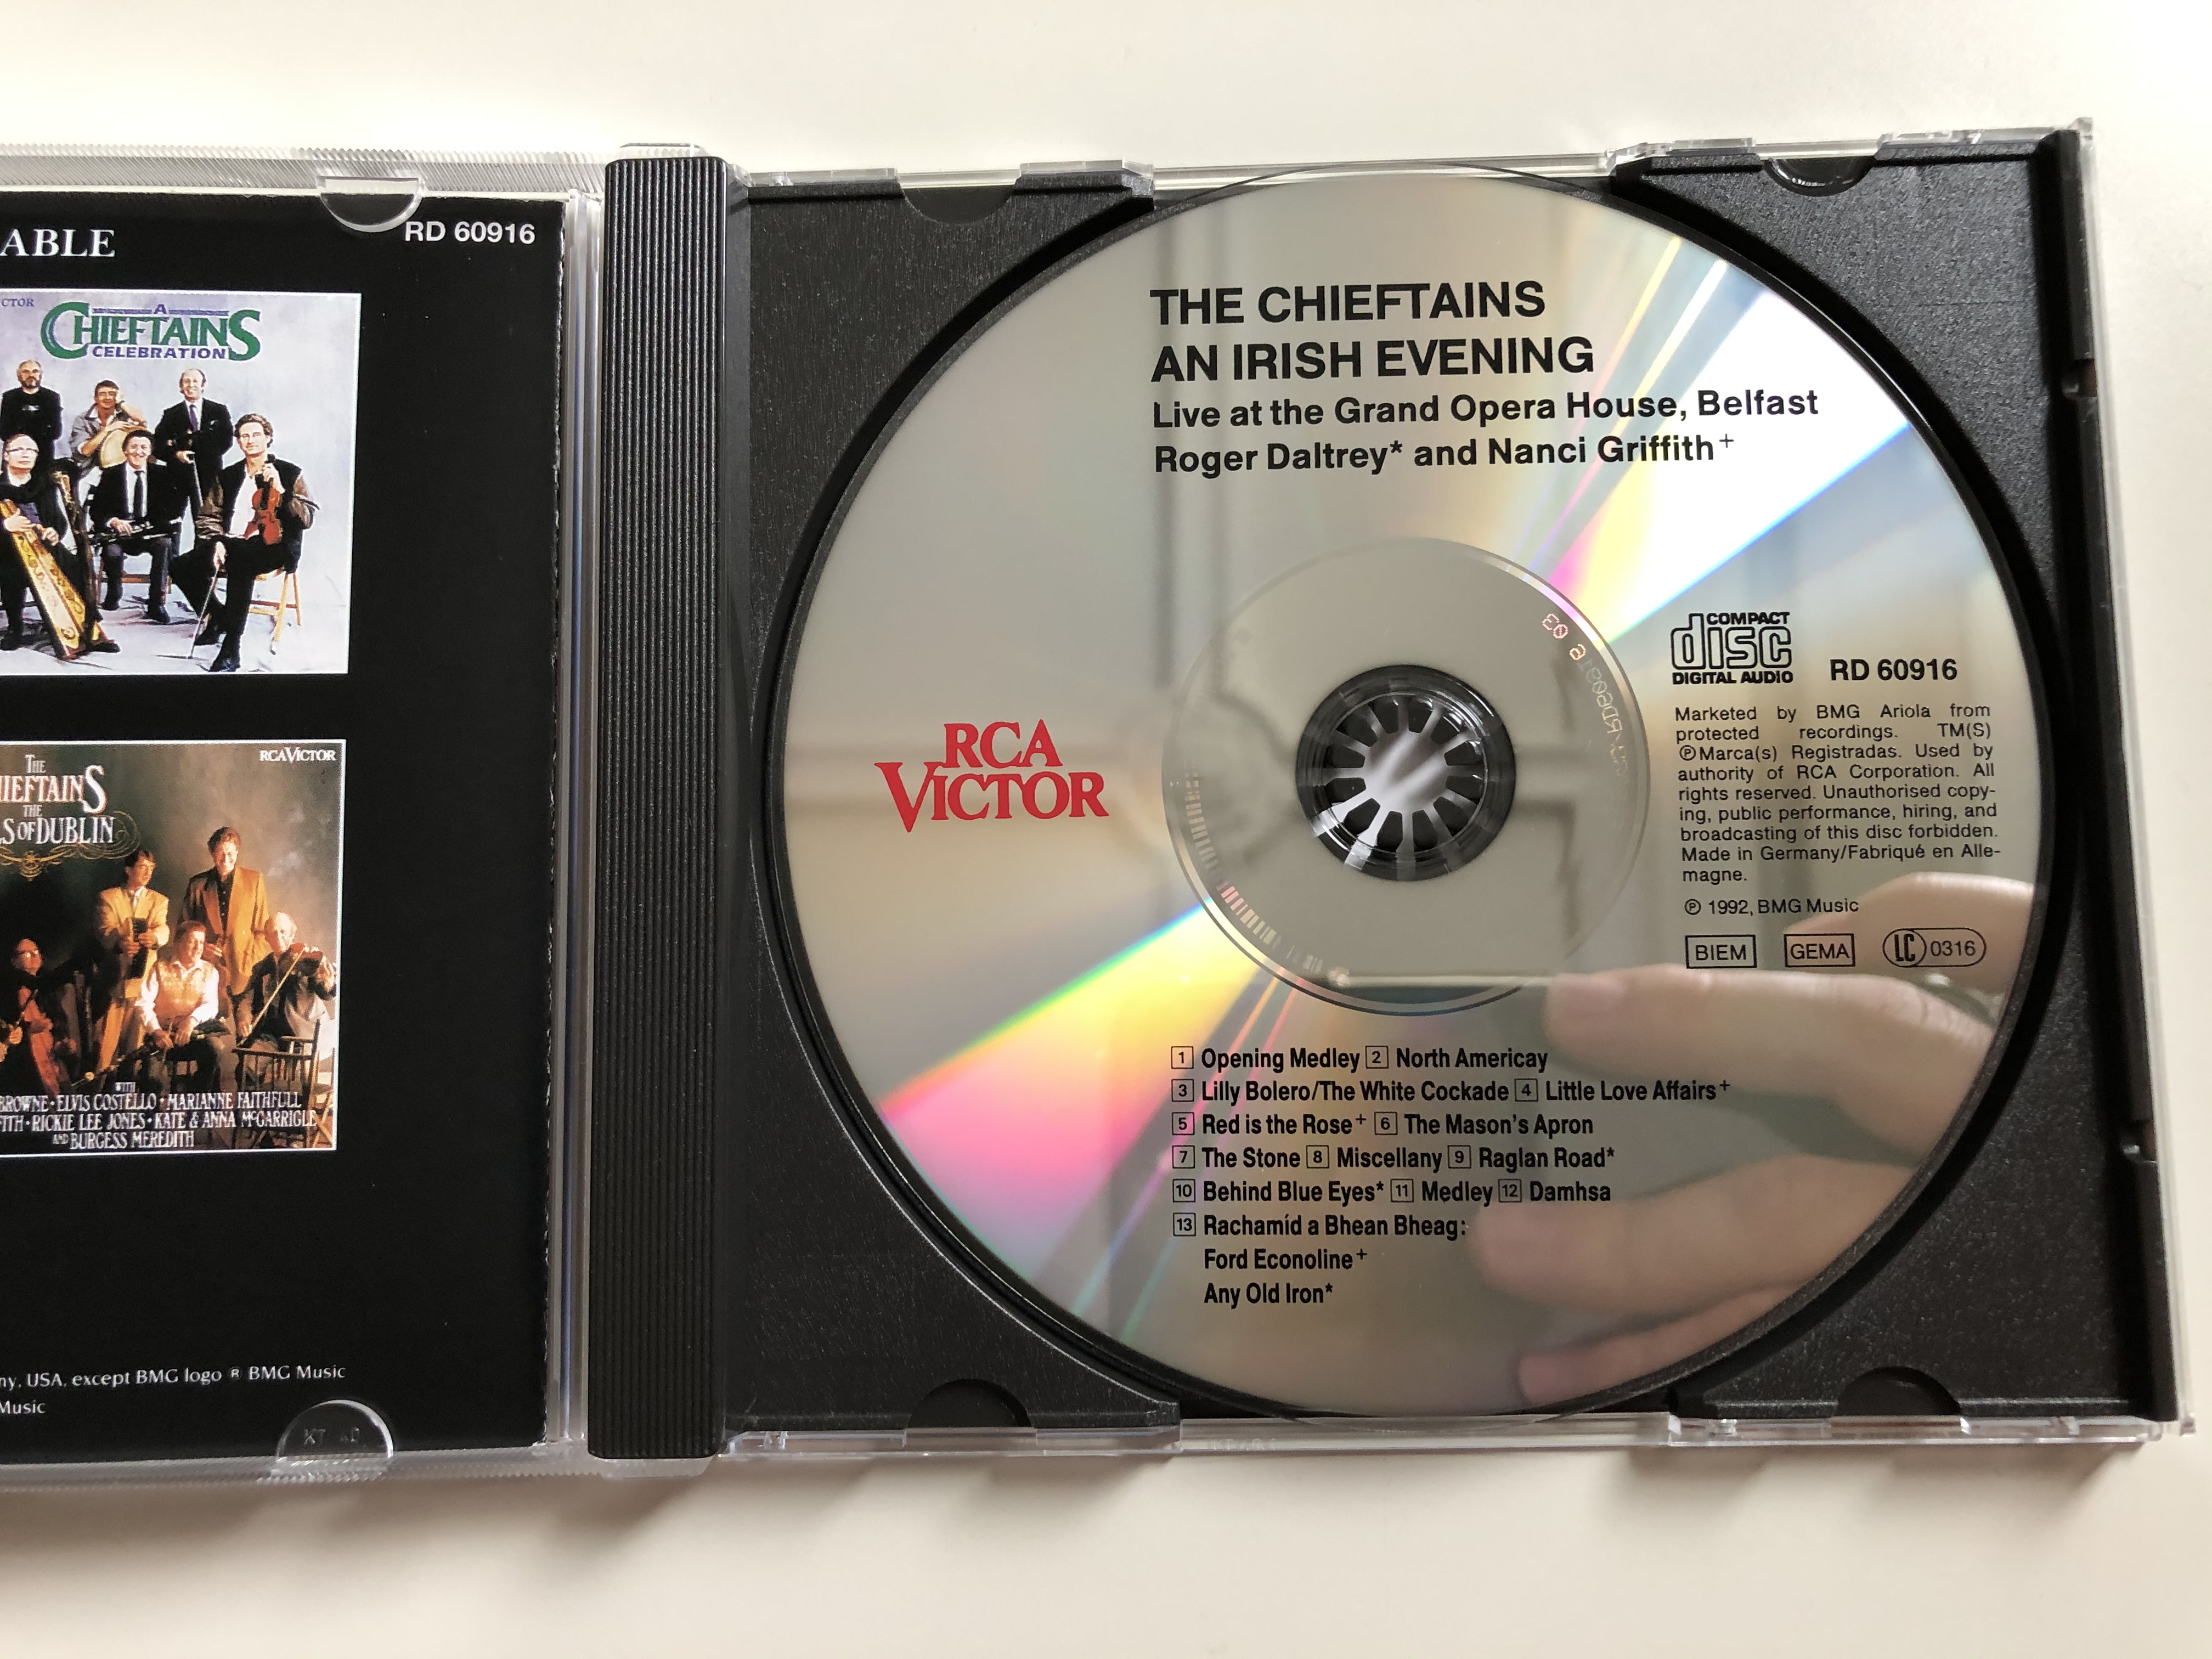 the-chieftains-an-irish-evening-live-at-the-grand-opera-house-belfast-with-roger-daltrey-and-nanci-griffith-rca-victor-audio-cd-1992-rd-60916-3-.jpg